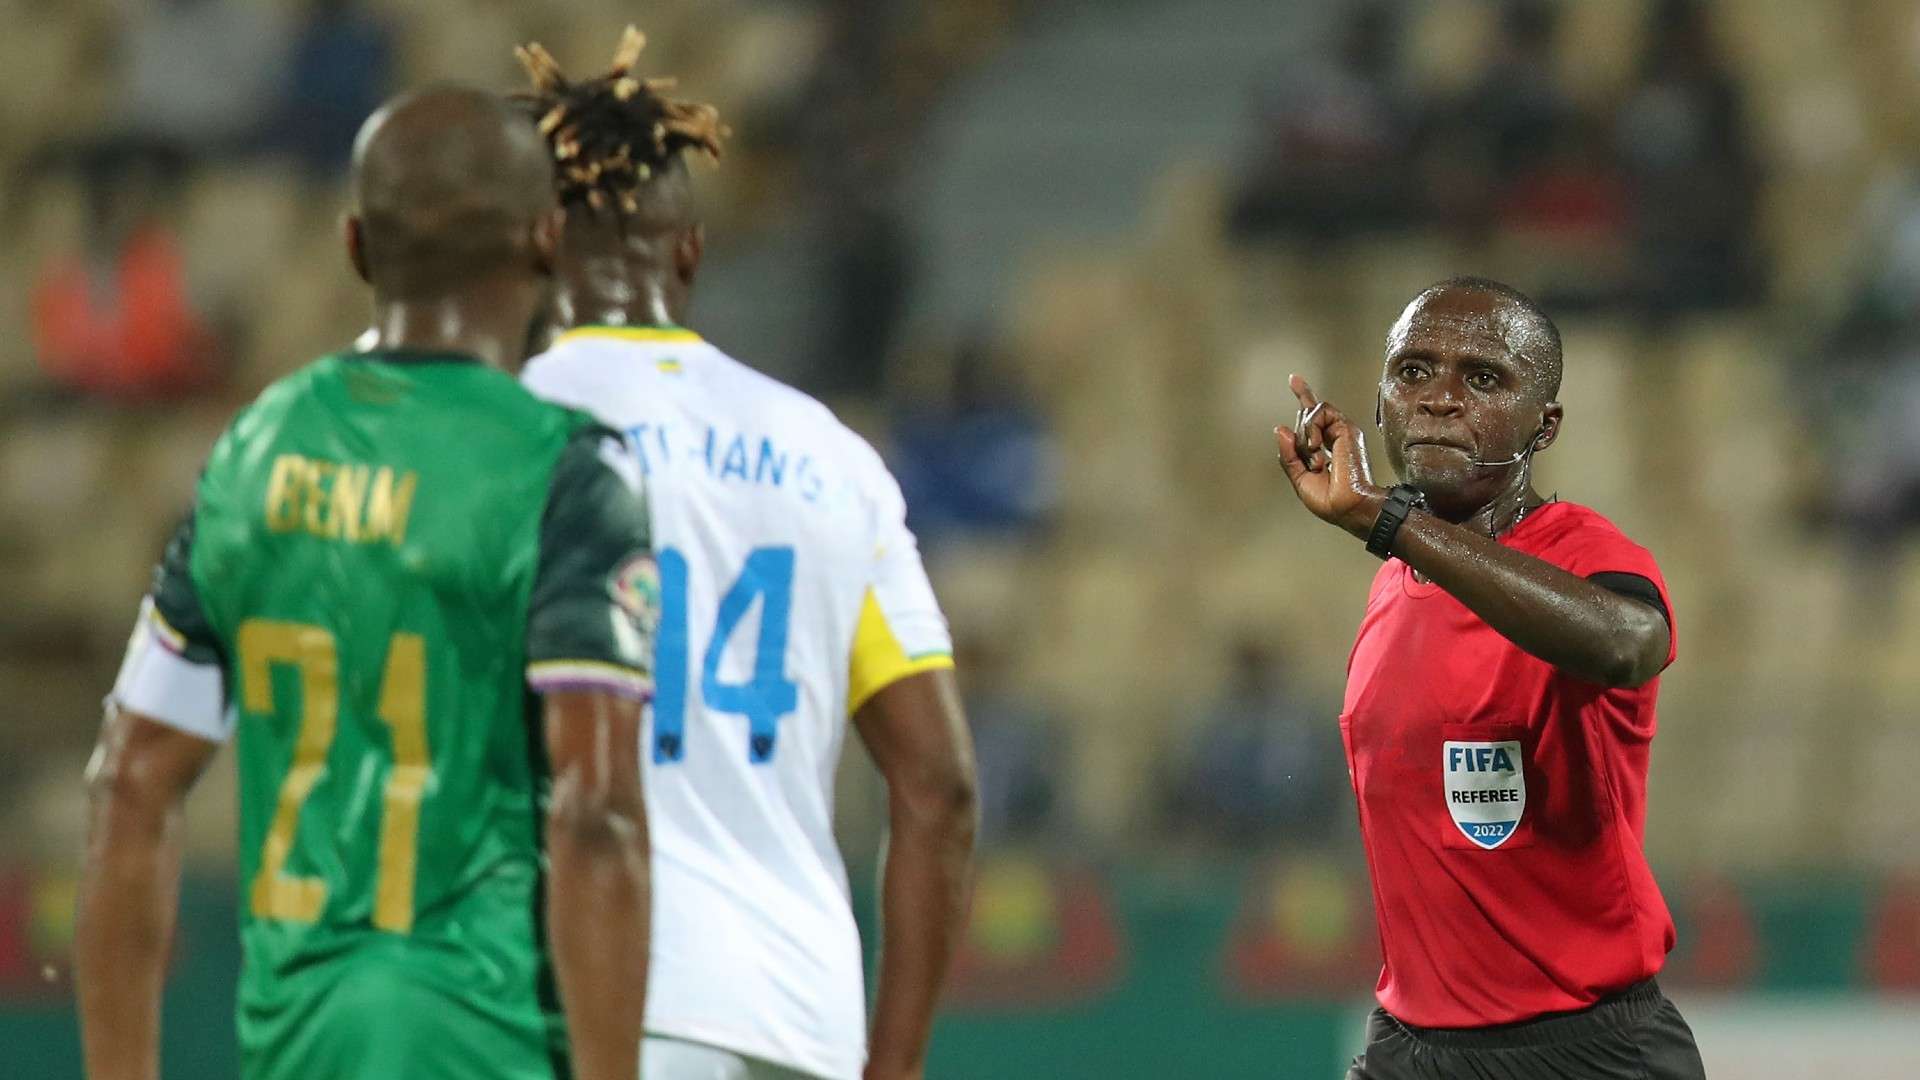 Kenya referee Peter Waweru Kamaku during the 2021 Africa Cup of Nations Afcon Finals.